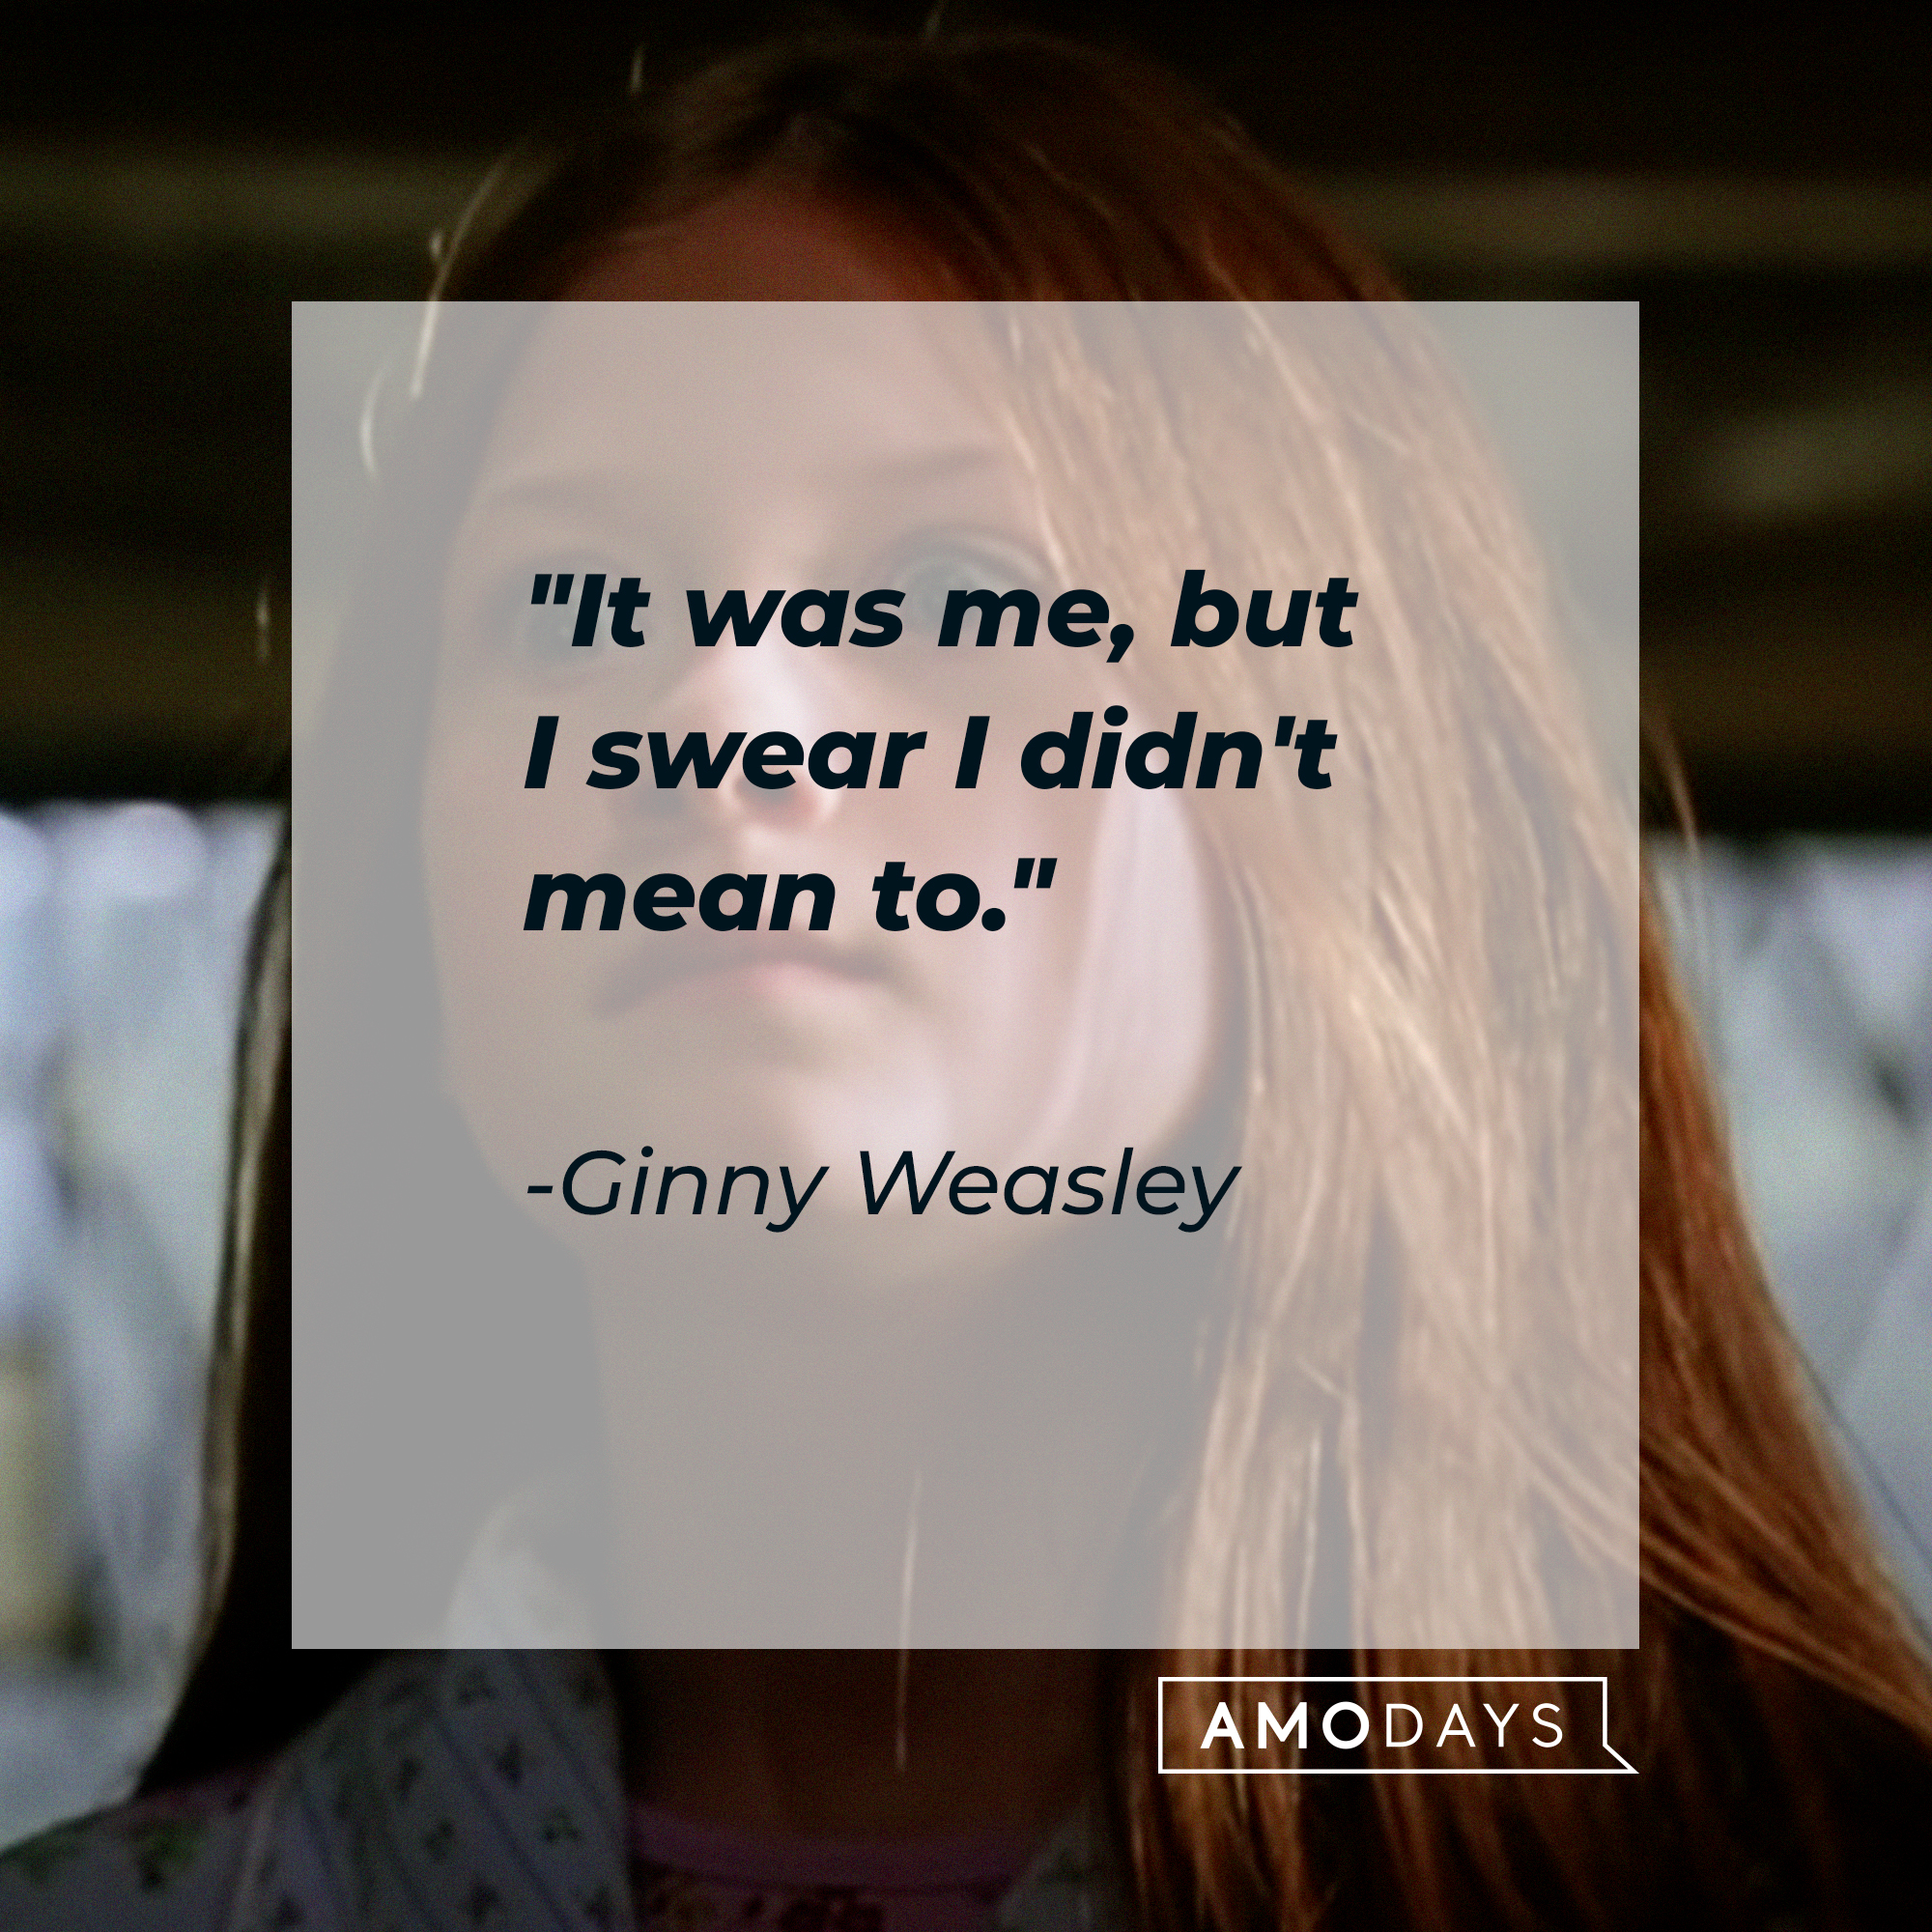 Ginny Weasley’s quote:  "It was me, but I swear I didn't mean to." | Image: Youtube.com/harrypotter